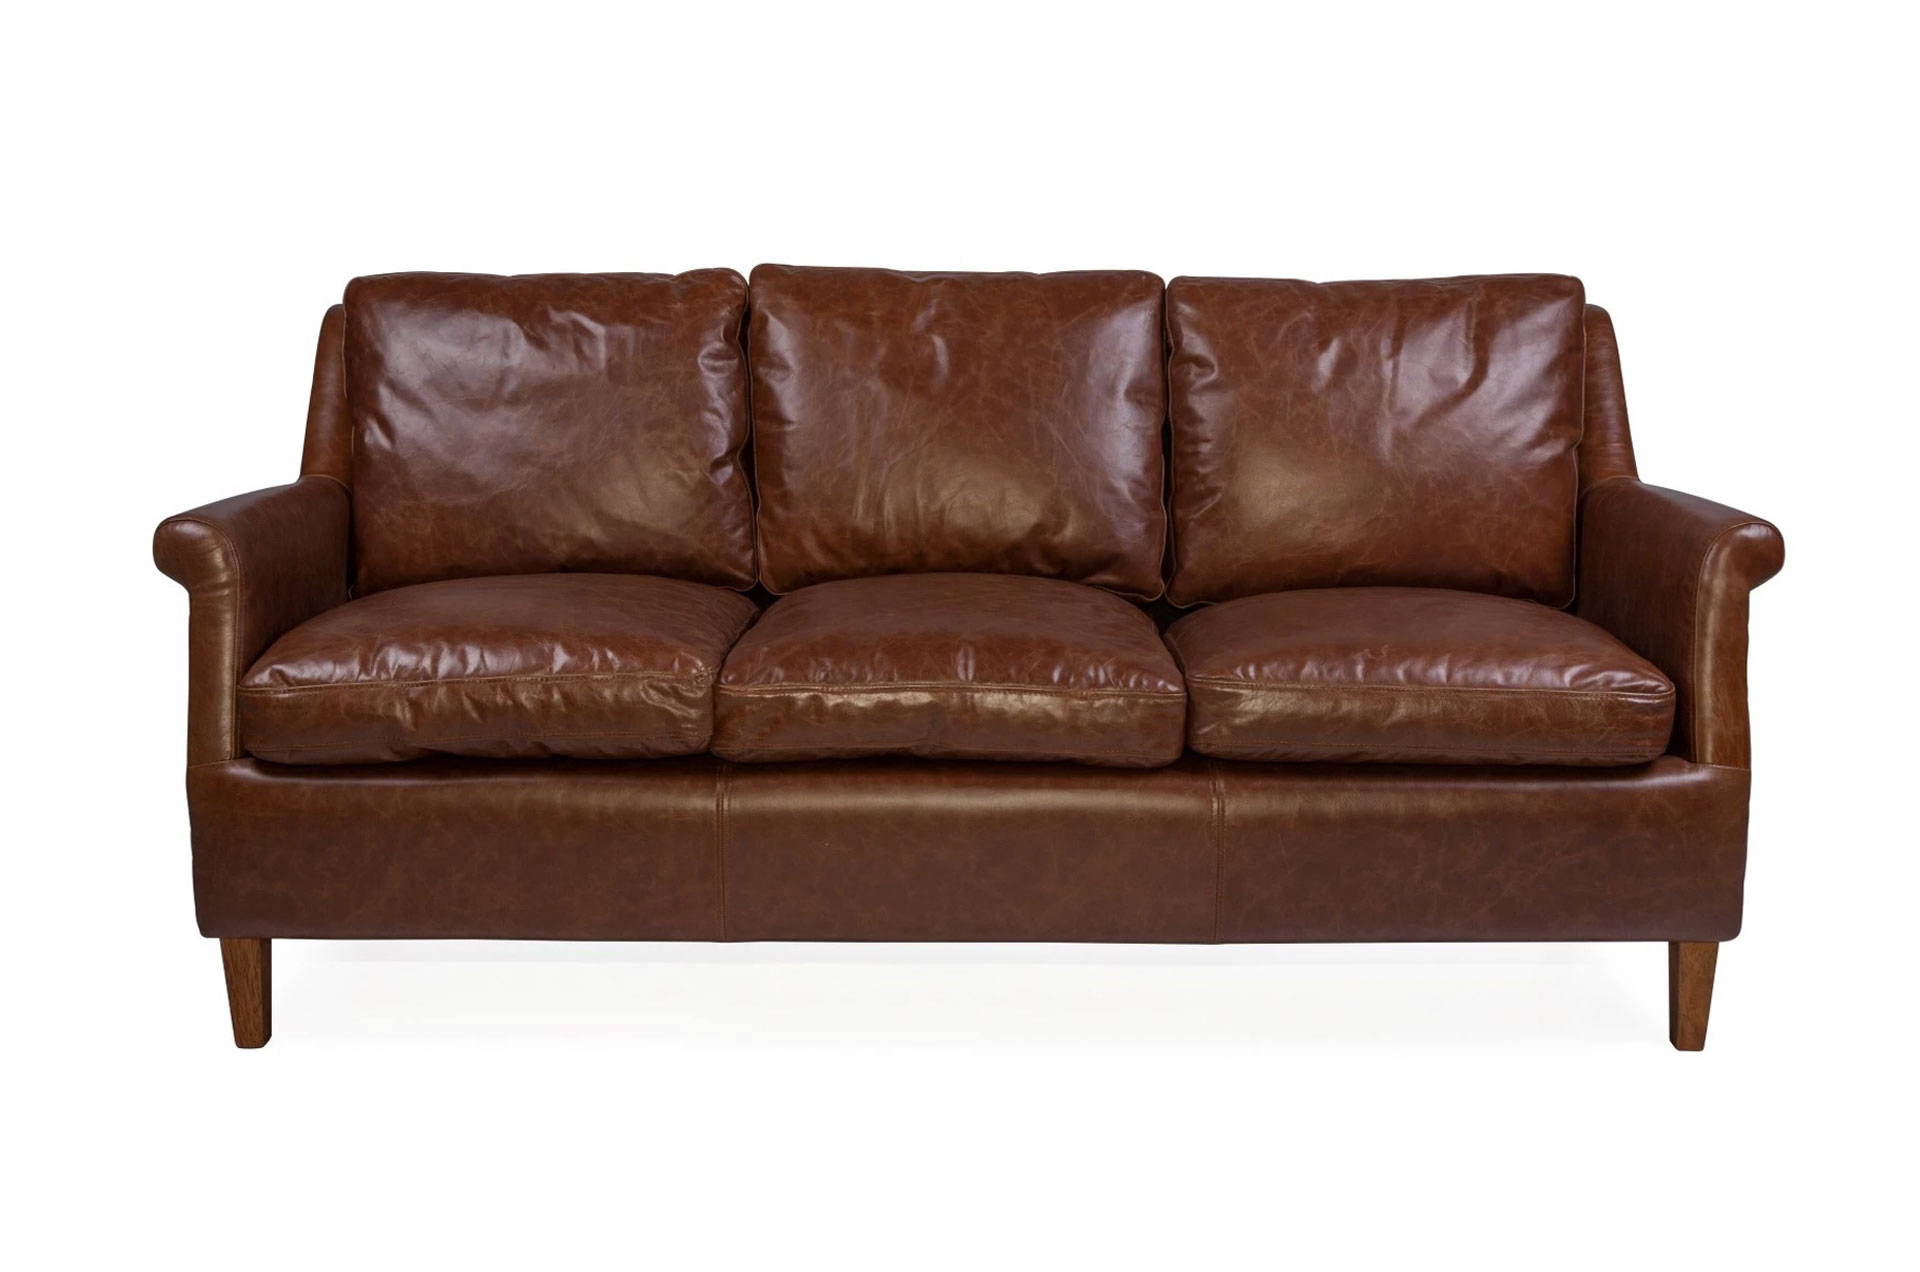 Club leather sofas made from superior quality leather